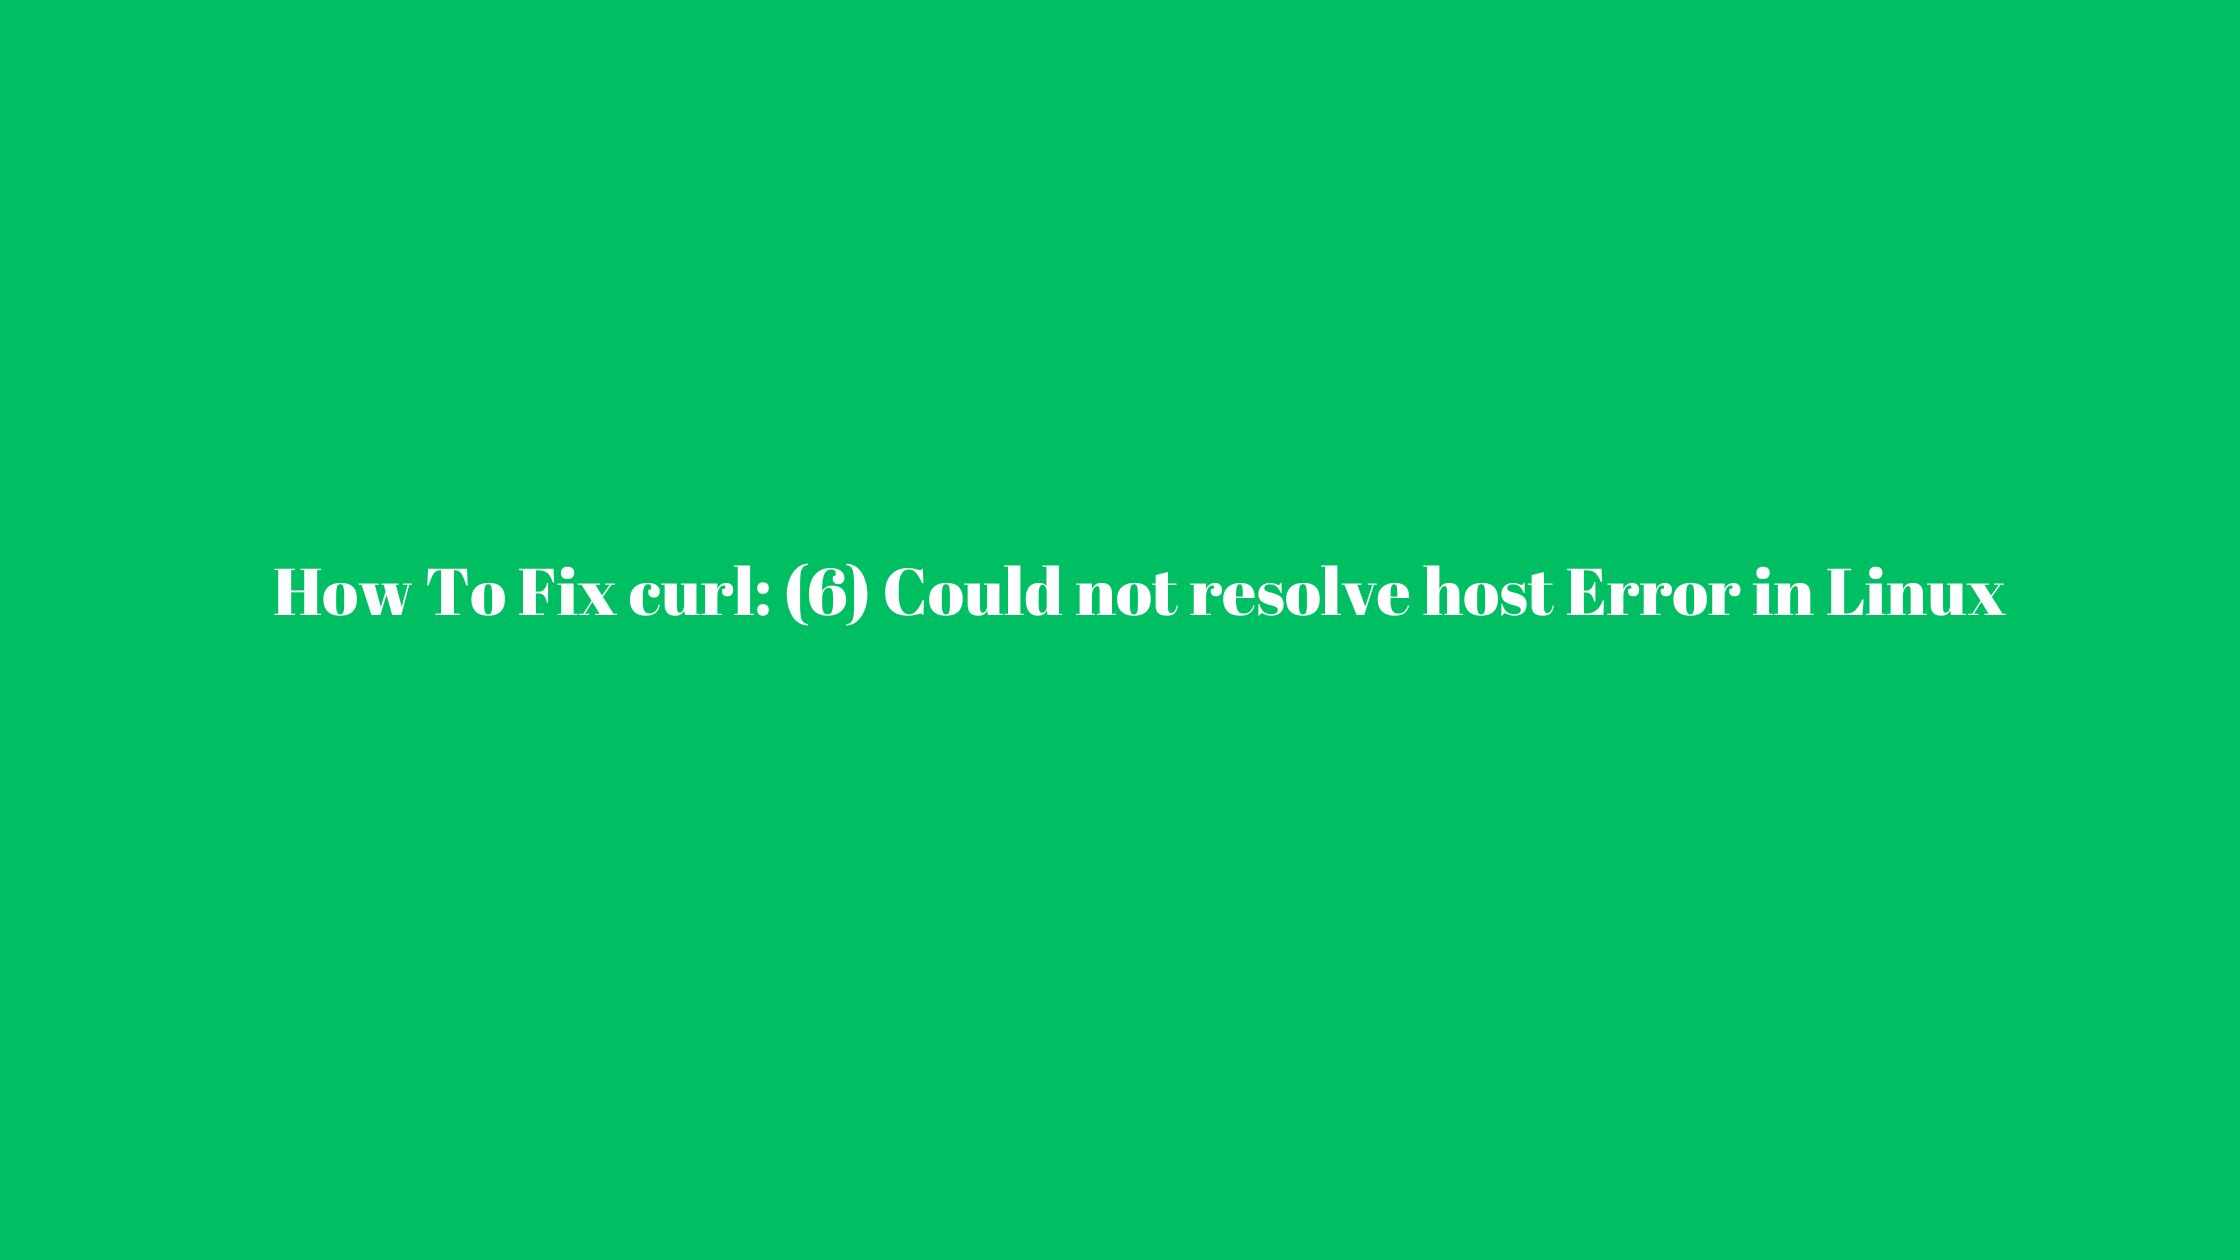 How To Fix curl: (6) Could not resolve host Error in Linux